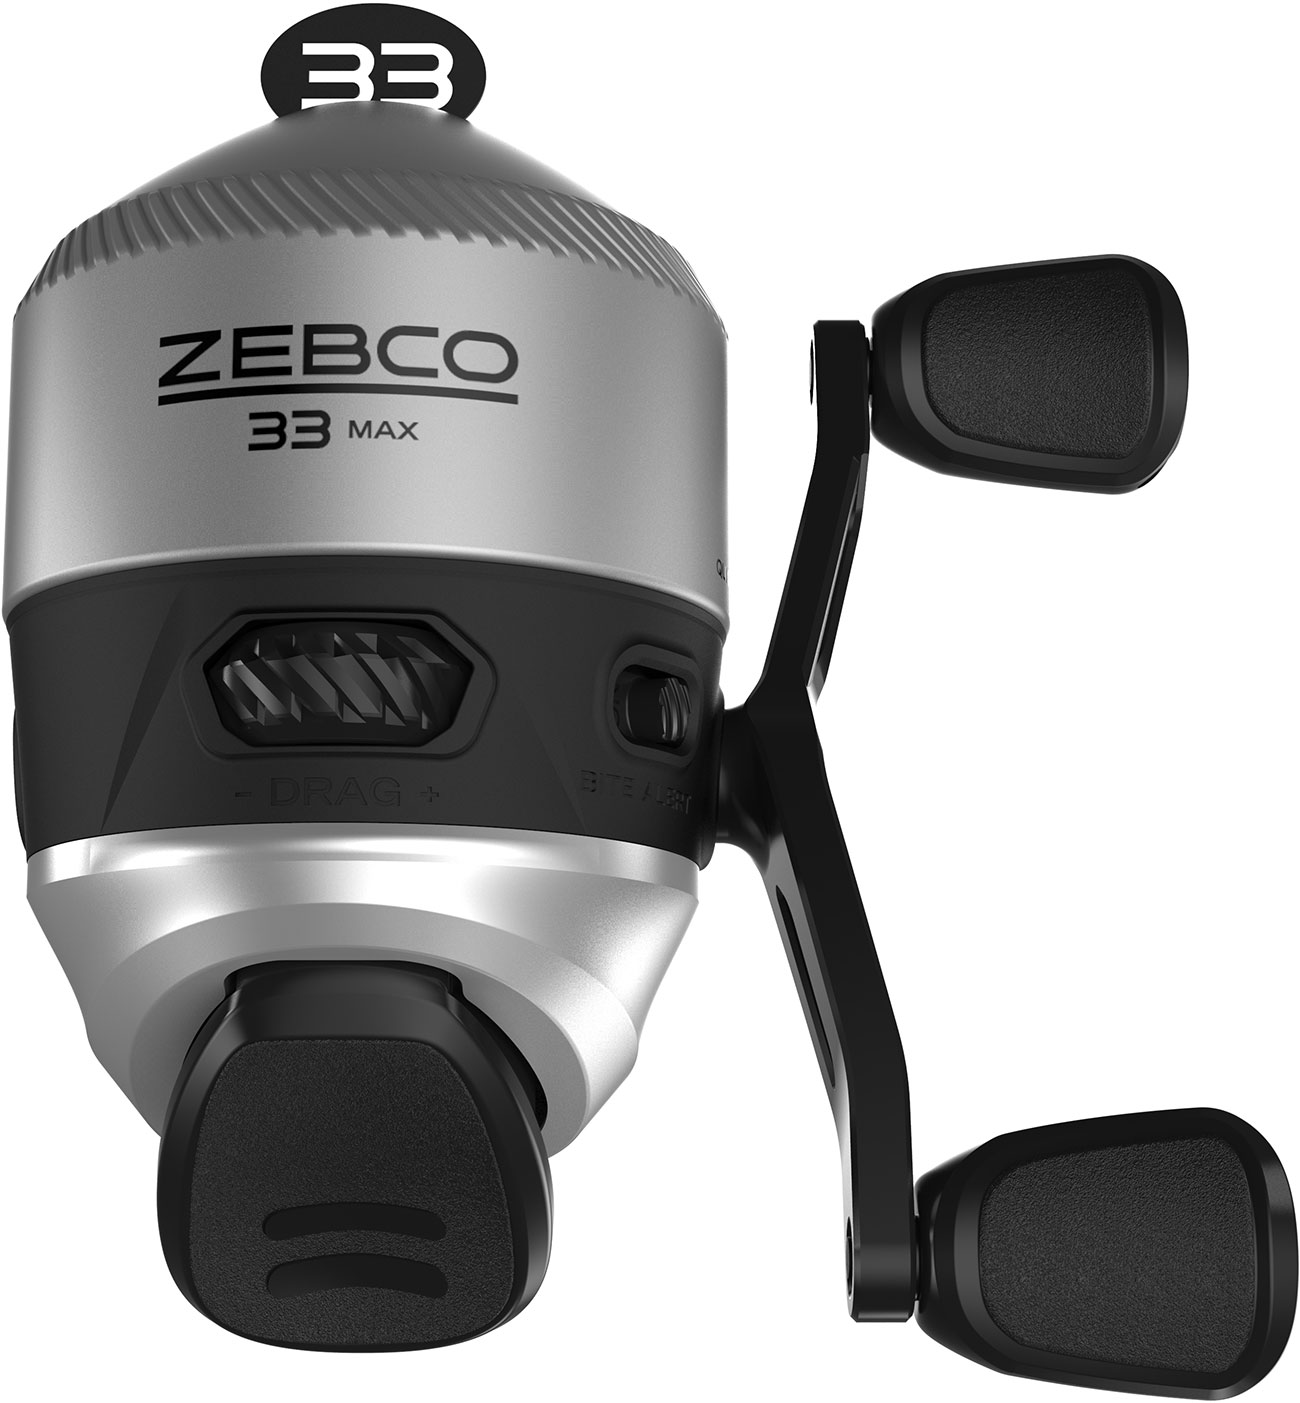 Zebco 33MAX SC Reel 20#C, Multi, One Size (33MXKA-20C-CP3) : :  Sports & Outdoors